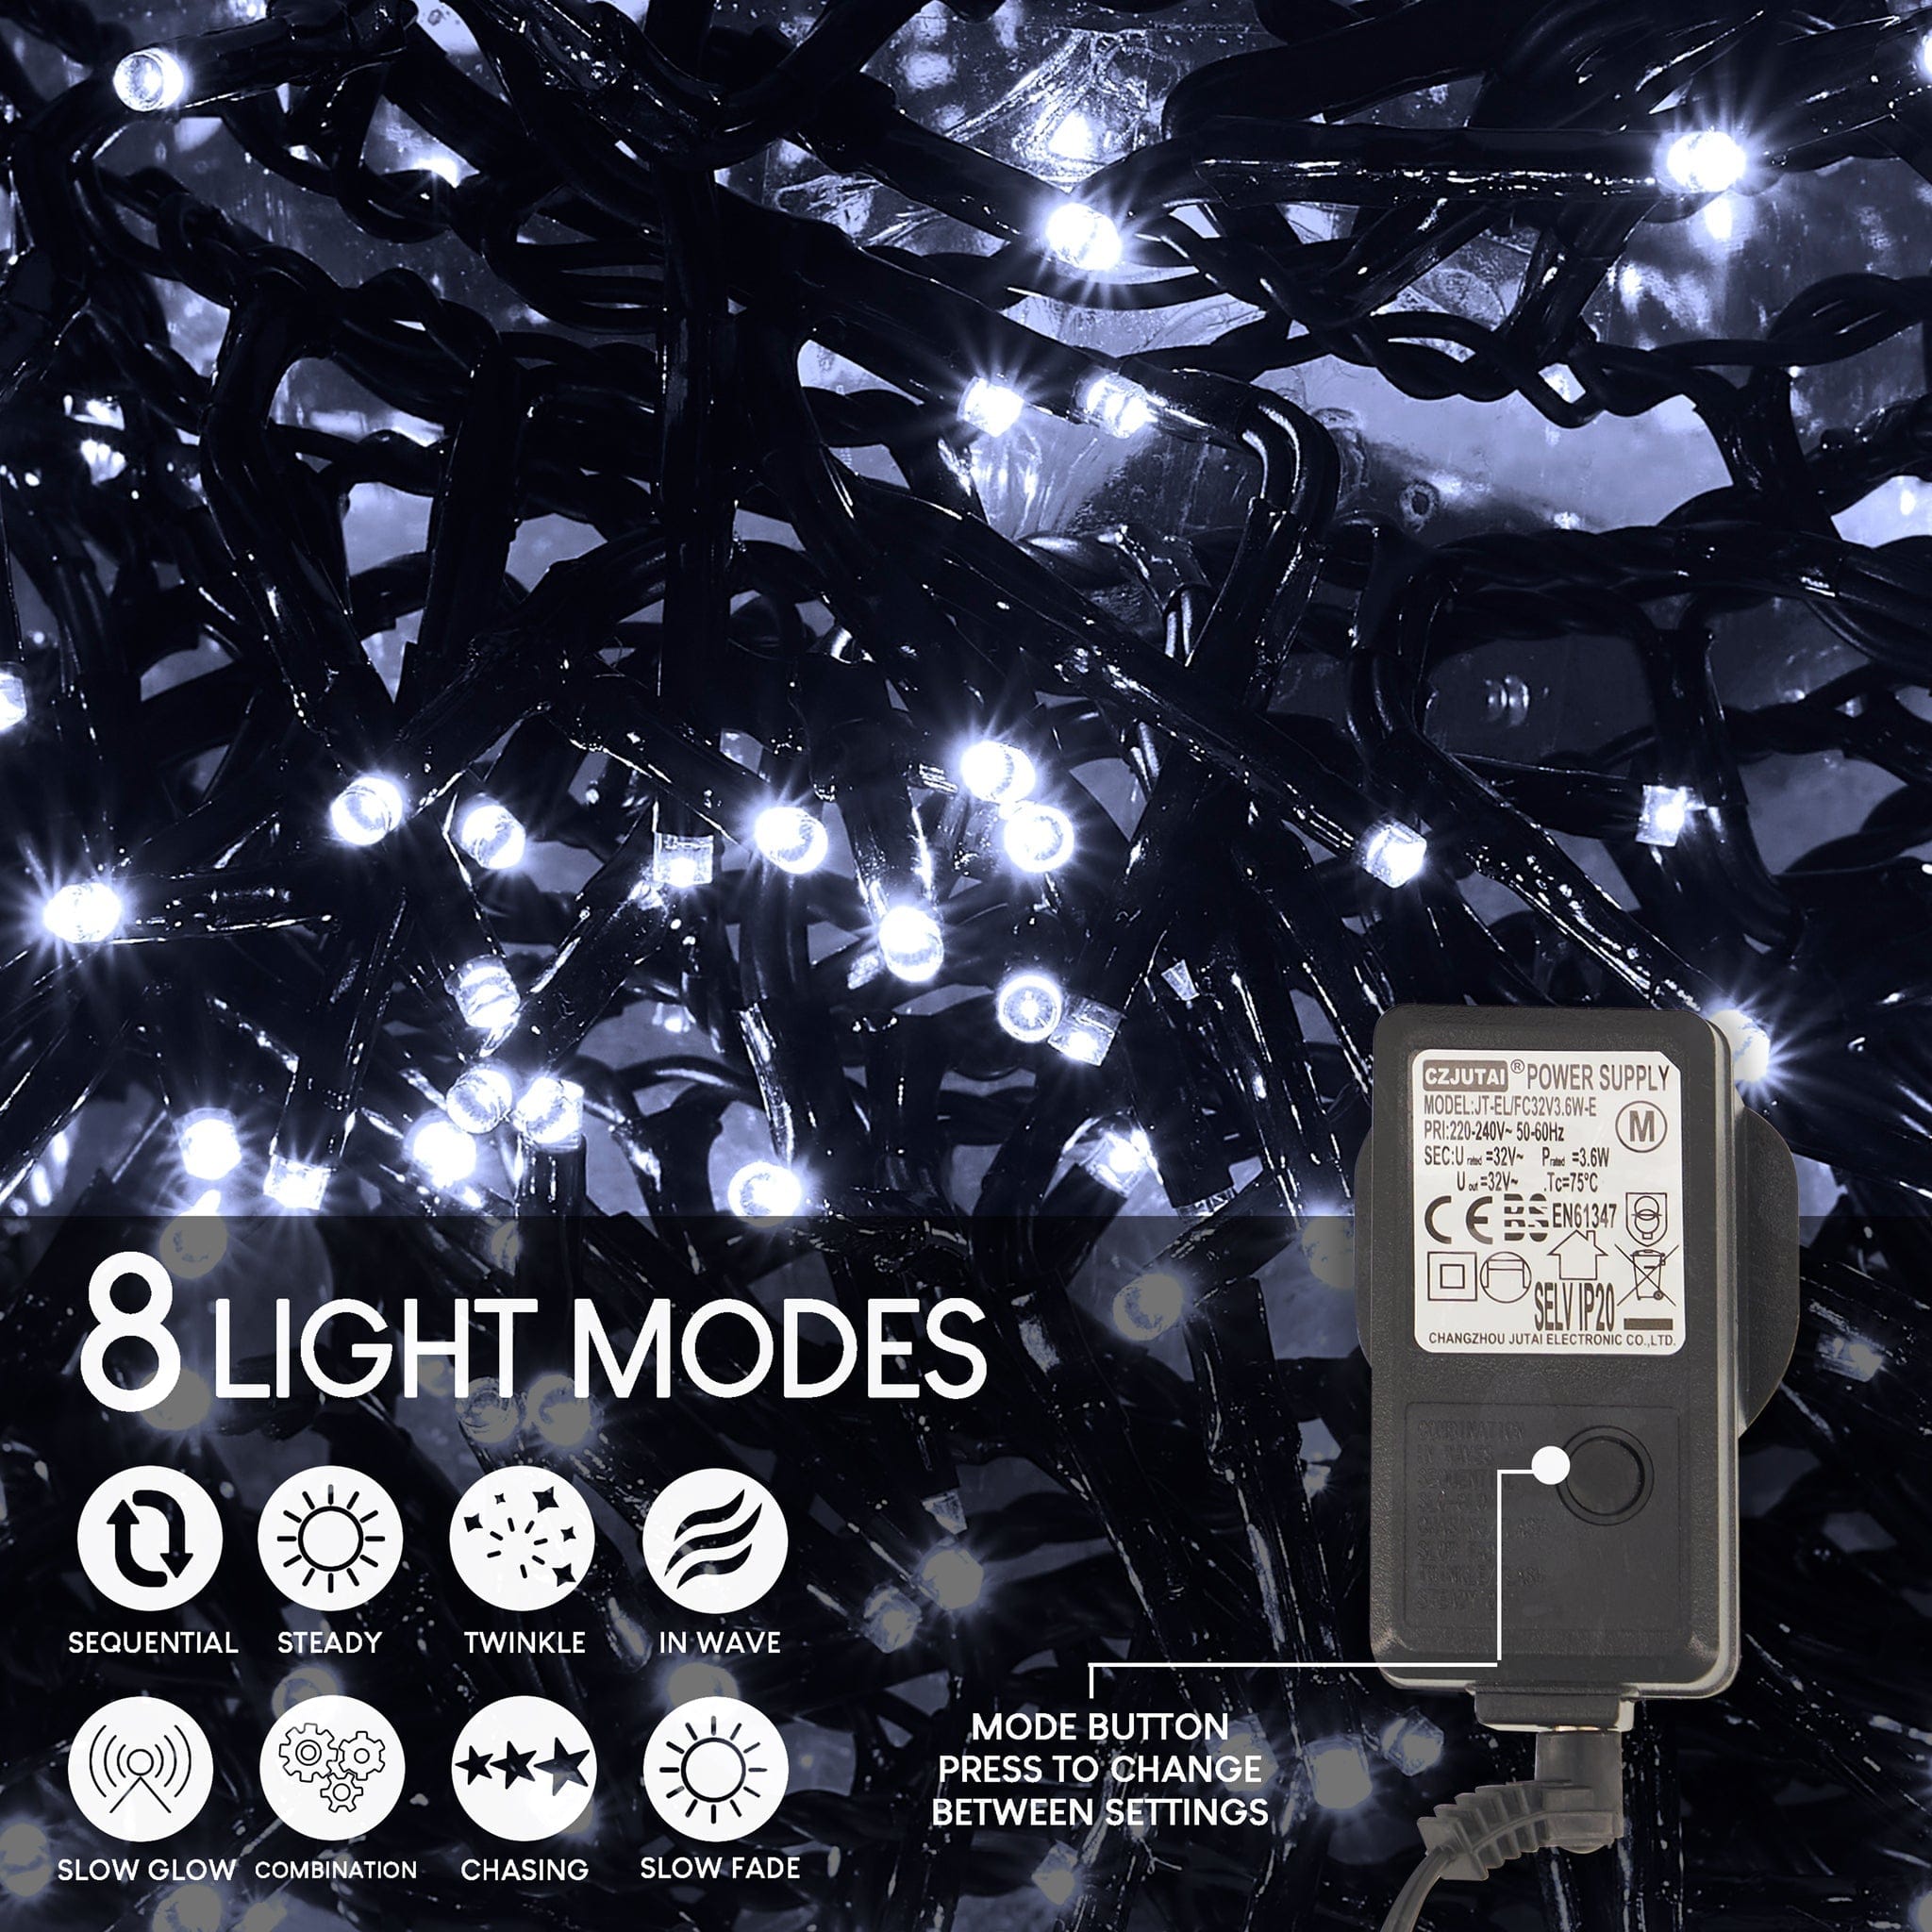 Indoor/Outdoor 8 Function LED Waterproof Cluster Fairy Lights with Black Cable (280 Cluster Lights - 17.5M Cable) - White Lights 5056150226413 only5pounds-com